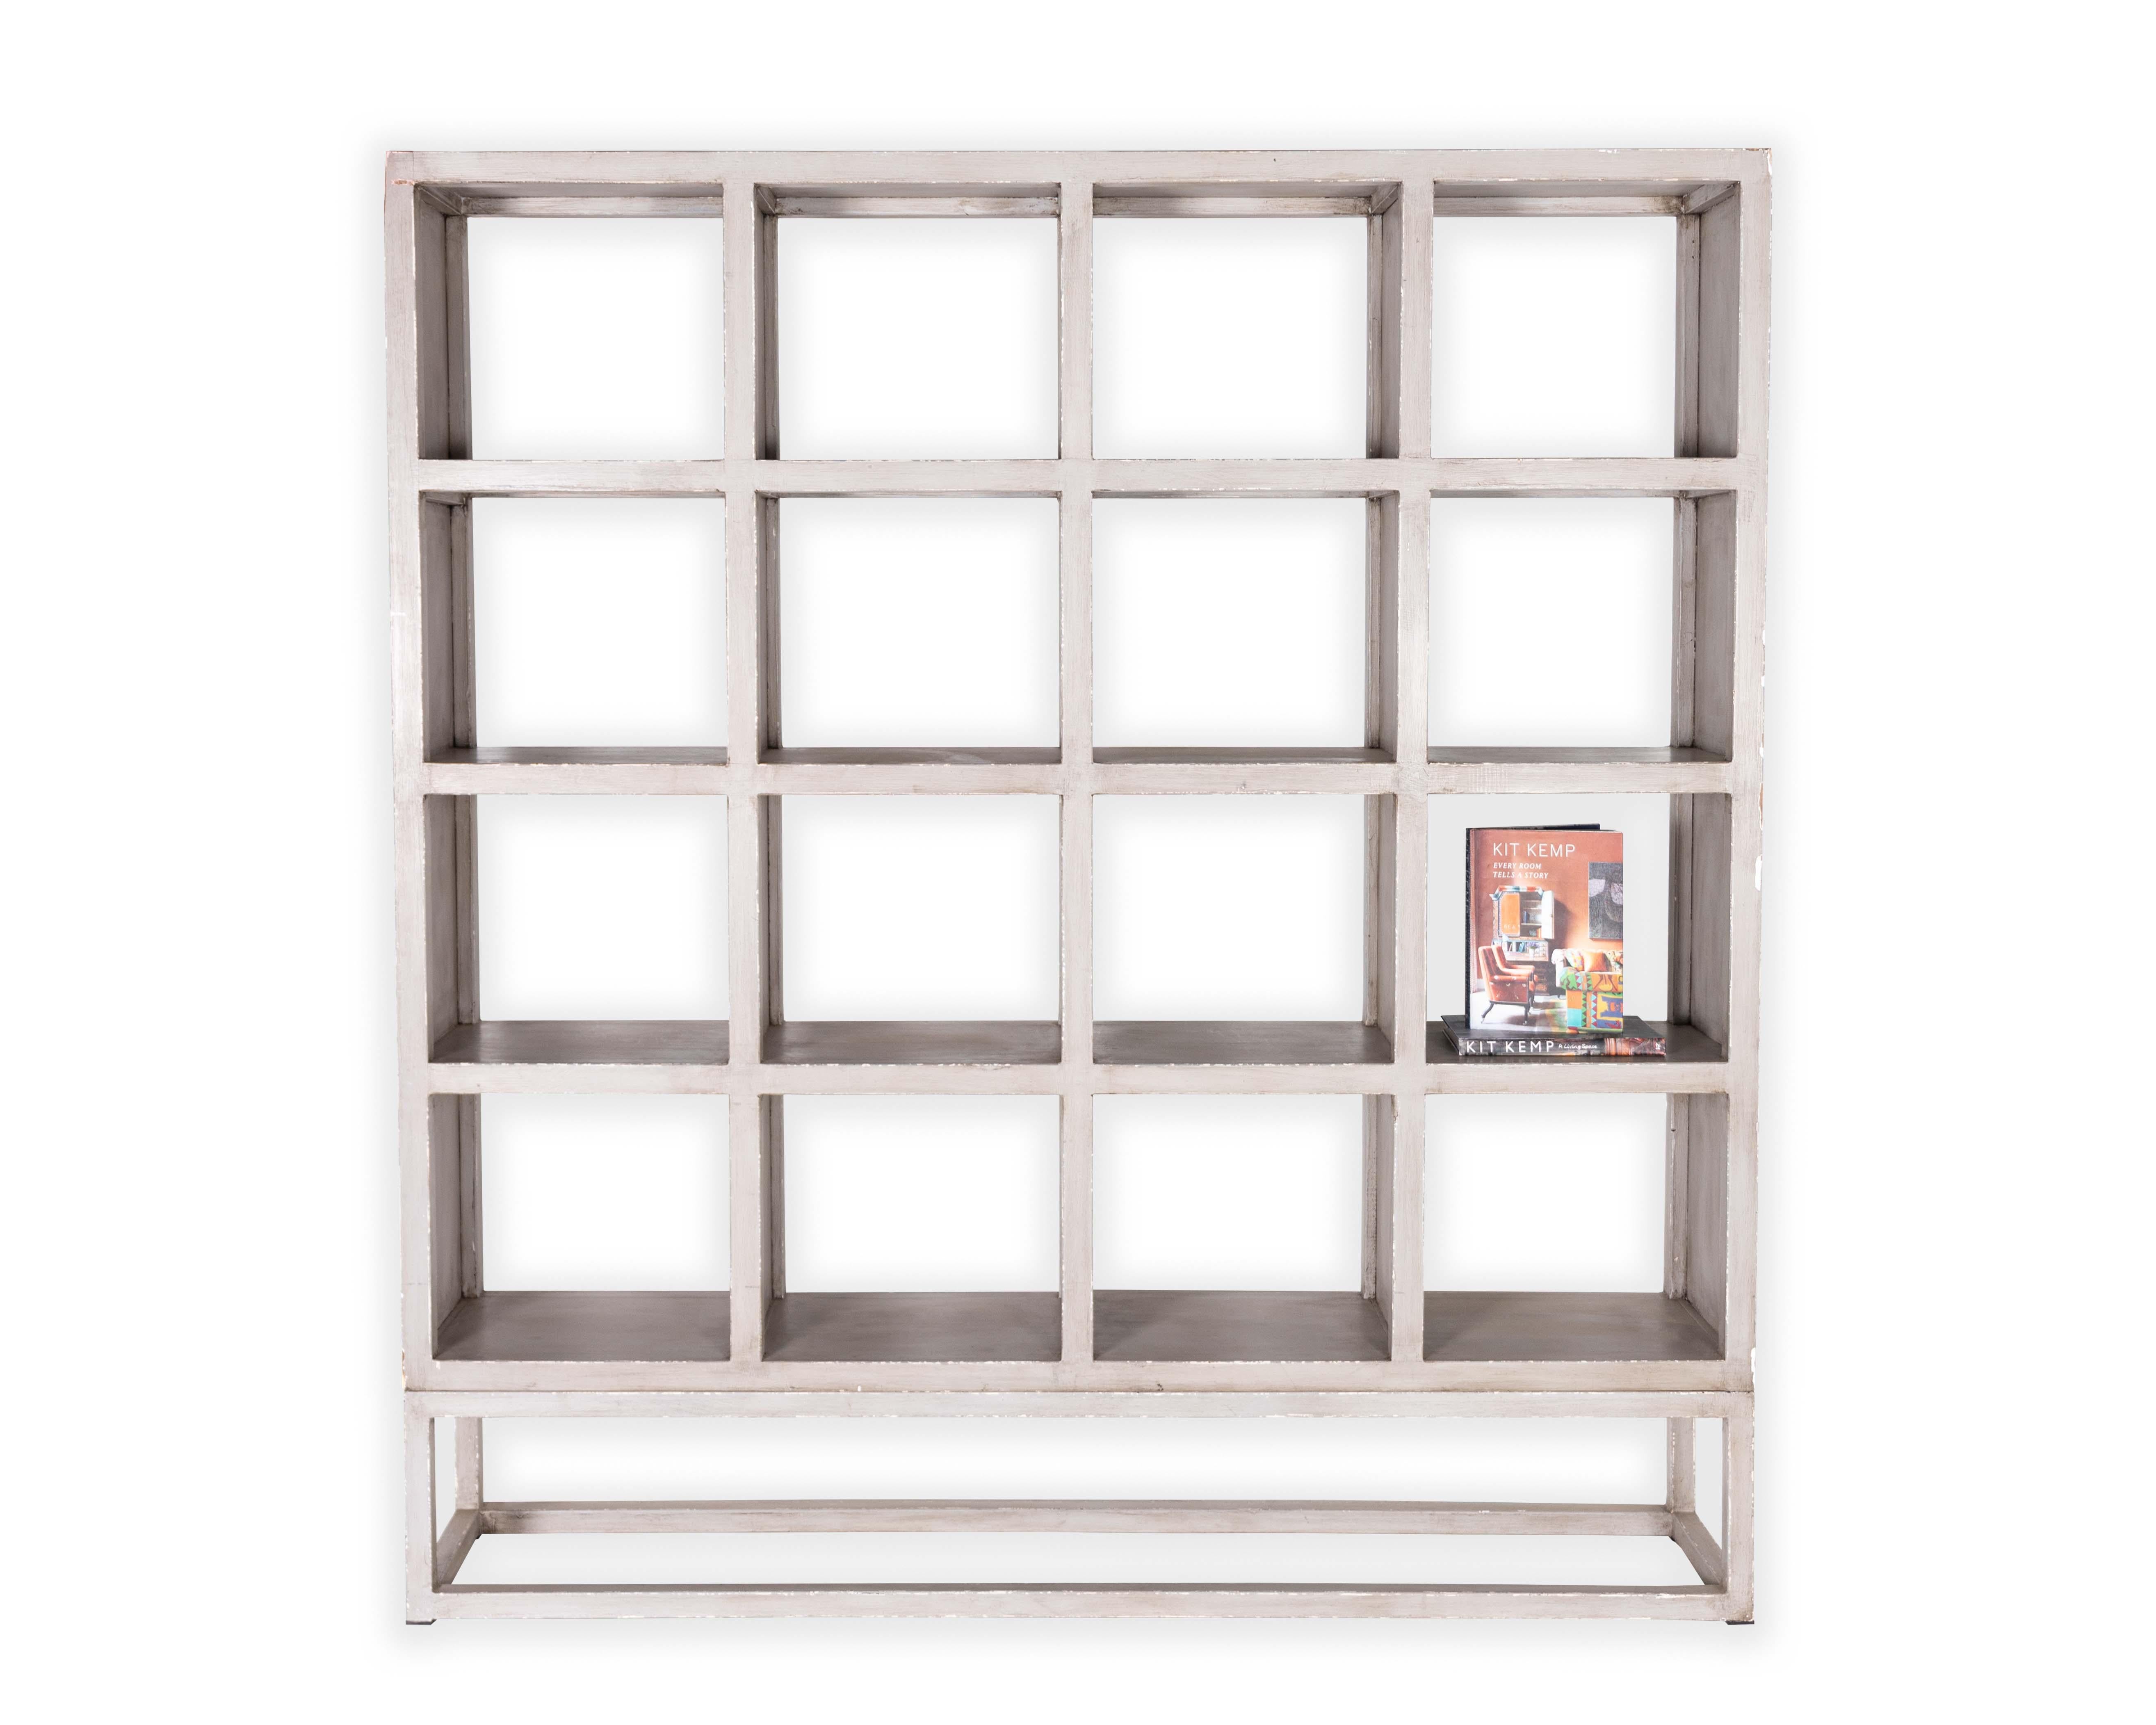 Reclaimed elm bookcase with a weathered grey finish.

Piece from out one of a kind collection, Le Monde. Exclusive to Brendan Bass.

Globally curated by Brendan Bass, Le Monde furniture and accessories offer modern sensibility, provincial